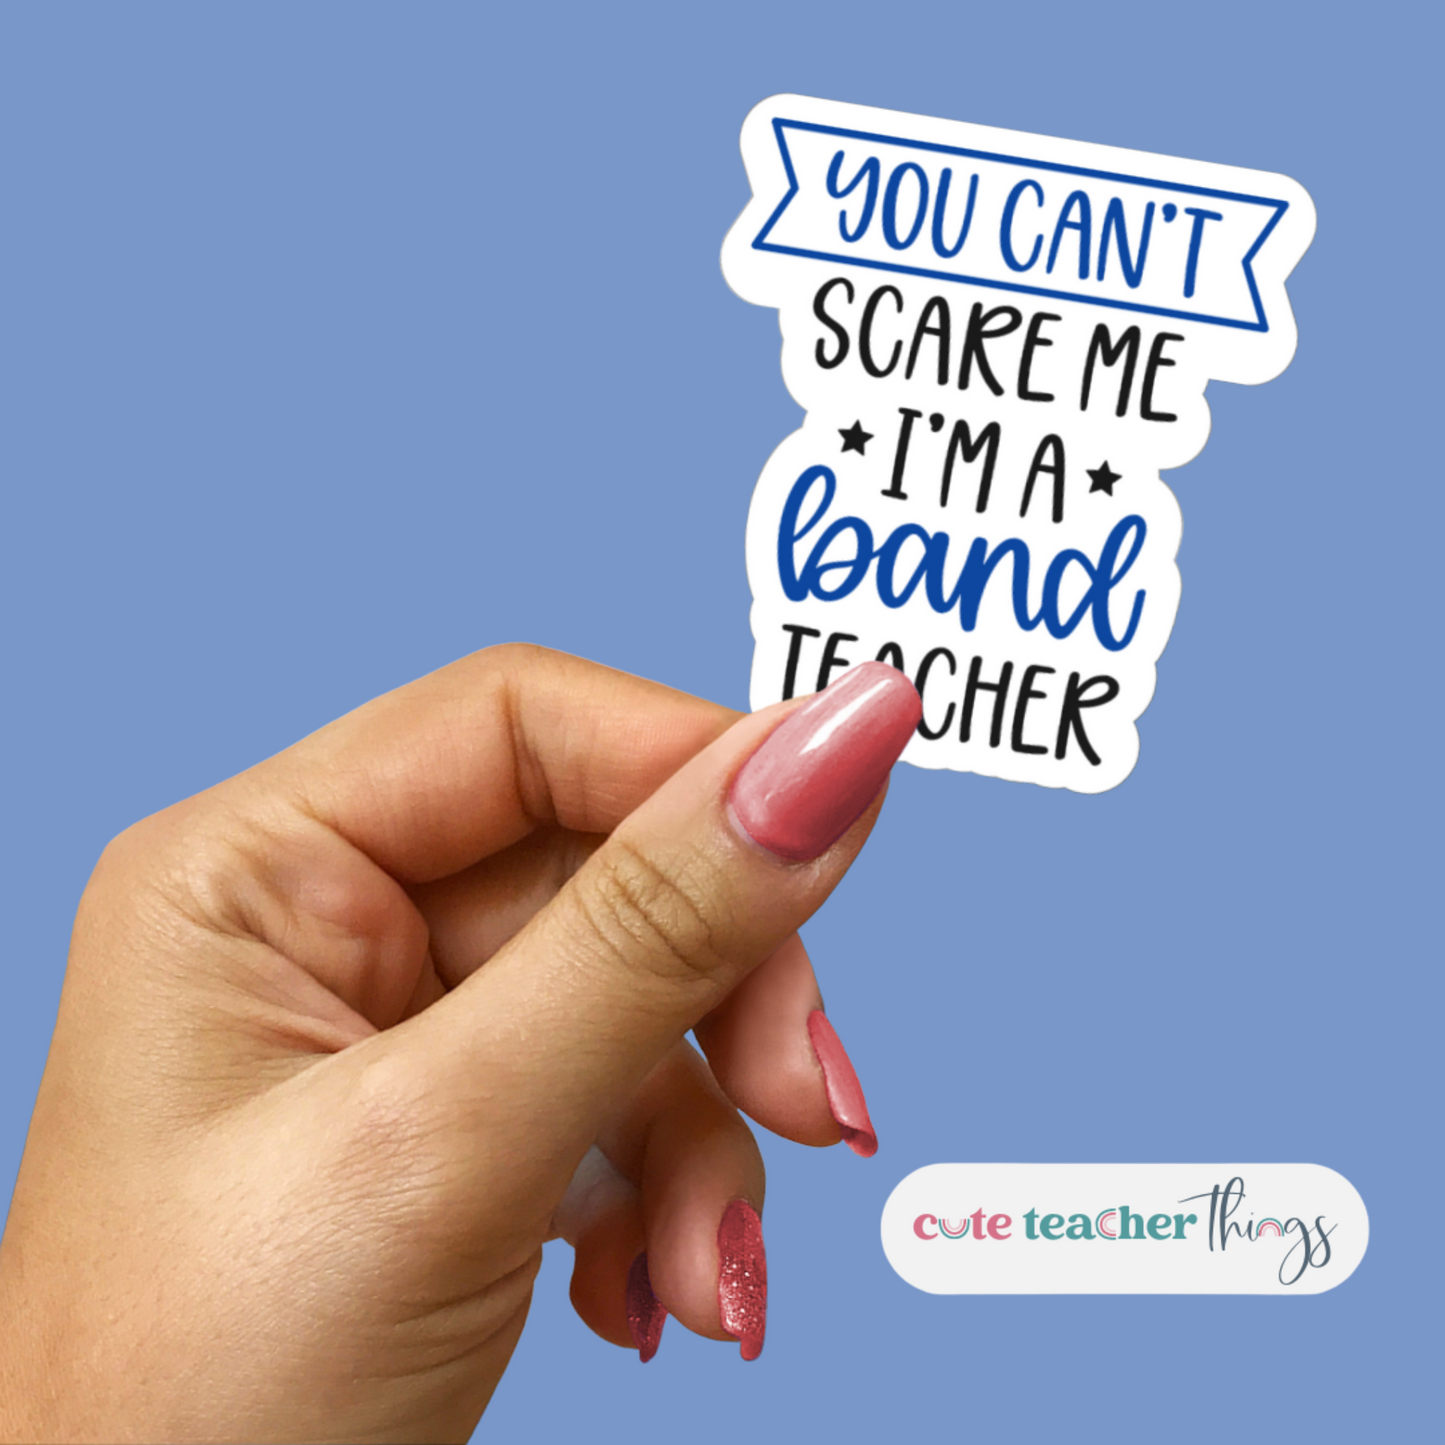 You can't Scare Me, I'm A Band Teacher Sticker